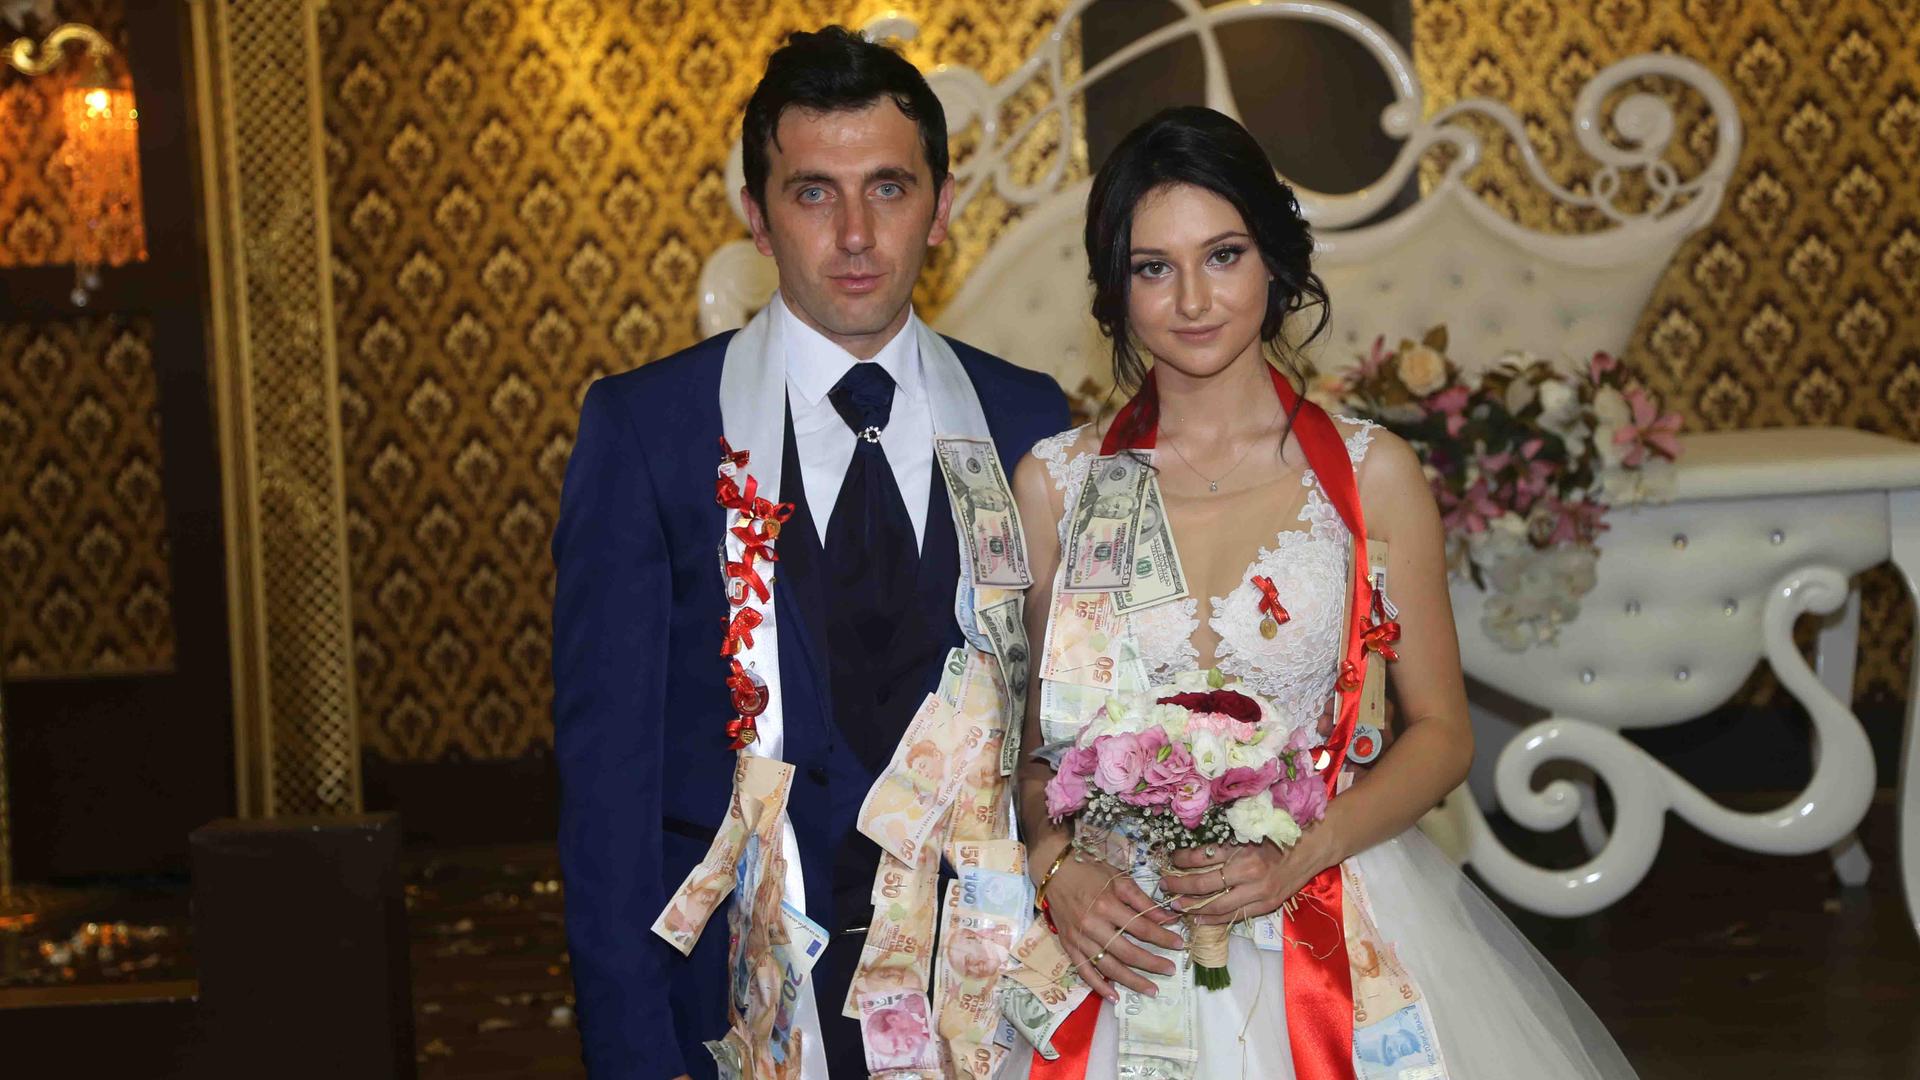 Turkish Men Emerge As The Most Eligible Bachelors For Russian Women - EchoT...